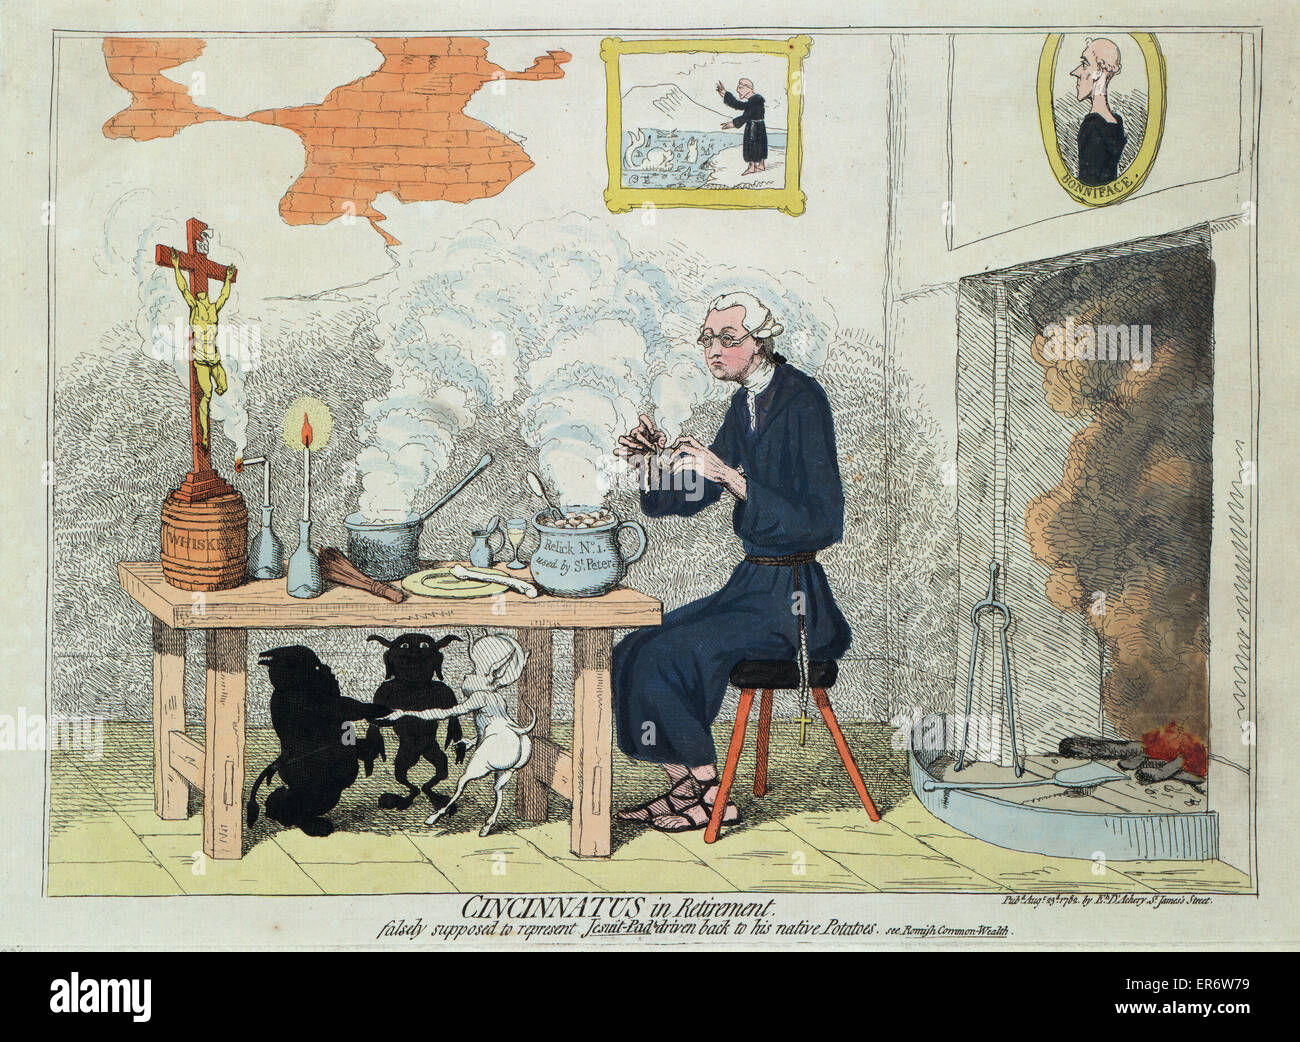 Cincinnatus in retirement falsely supposed to represent Jesuit-Pad driven back to his native Potatoes : see Romish Common-Wealth. Cartoon showing Edmund Burke, as an Irish jesuit, seated at a table eating potatoes from a pot labeled Relick No. 1. used by Stock Photo